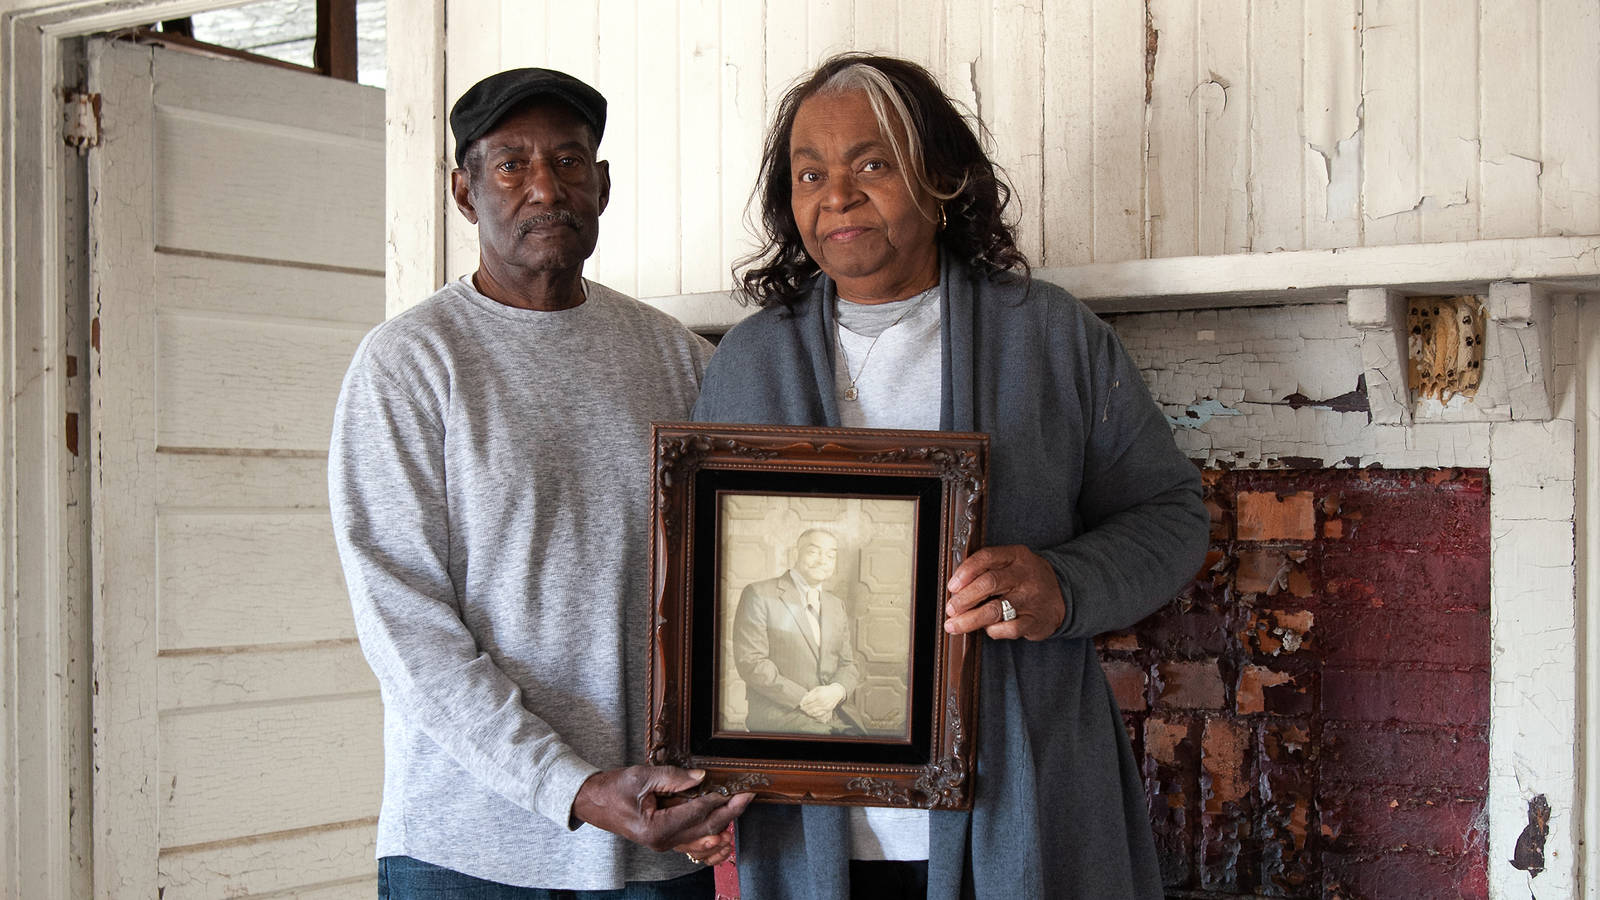 <p>On March 21, 1965, after gaining court approval for the voting rights protest, thousands of marchers walked more than 50 miles from Selma to Montgomery. Mary Hall-McGuire and Johnnie McGuire hold a picture of Mary’s father, David Hall, a farmer who opened his property to protesters, allowing them to camp on his land and stay in his barn and home. “It was so incredibly brave,” said NPCA’s Alan Spears. Between 1947 and 1965, roughly 50 bombs were detonated in Birmingham by the Ku Klux Klan and other pro-segregation groups, and “the overall feeling in Alabama was that if you participate, you might have a bomb coming to your farm or house.” The portrait was taken in the Hall home.</p>